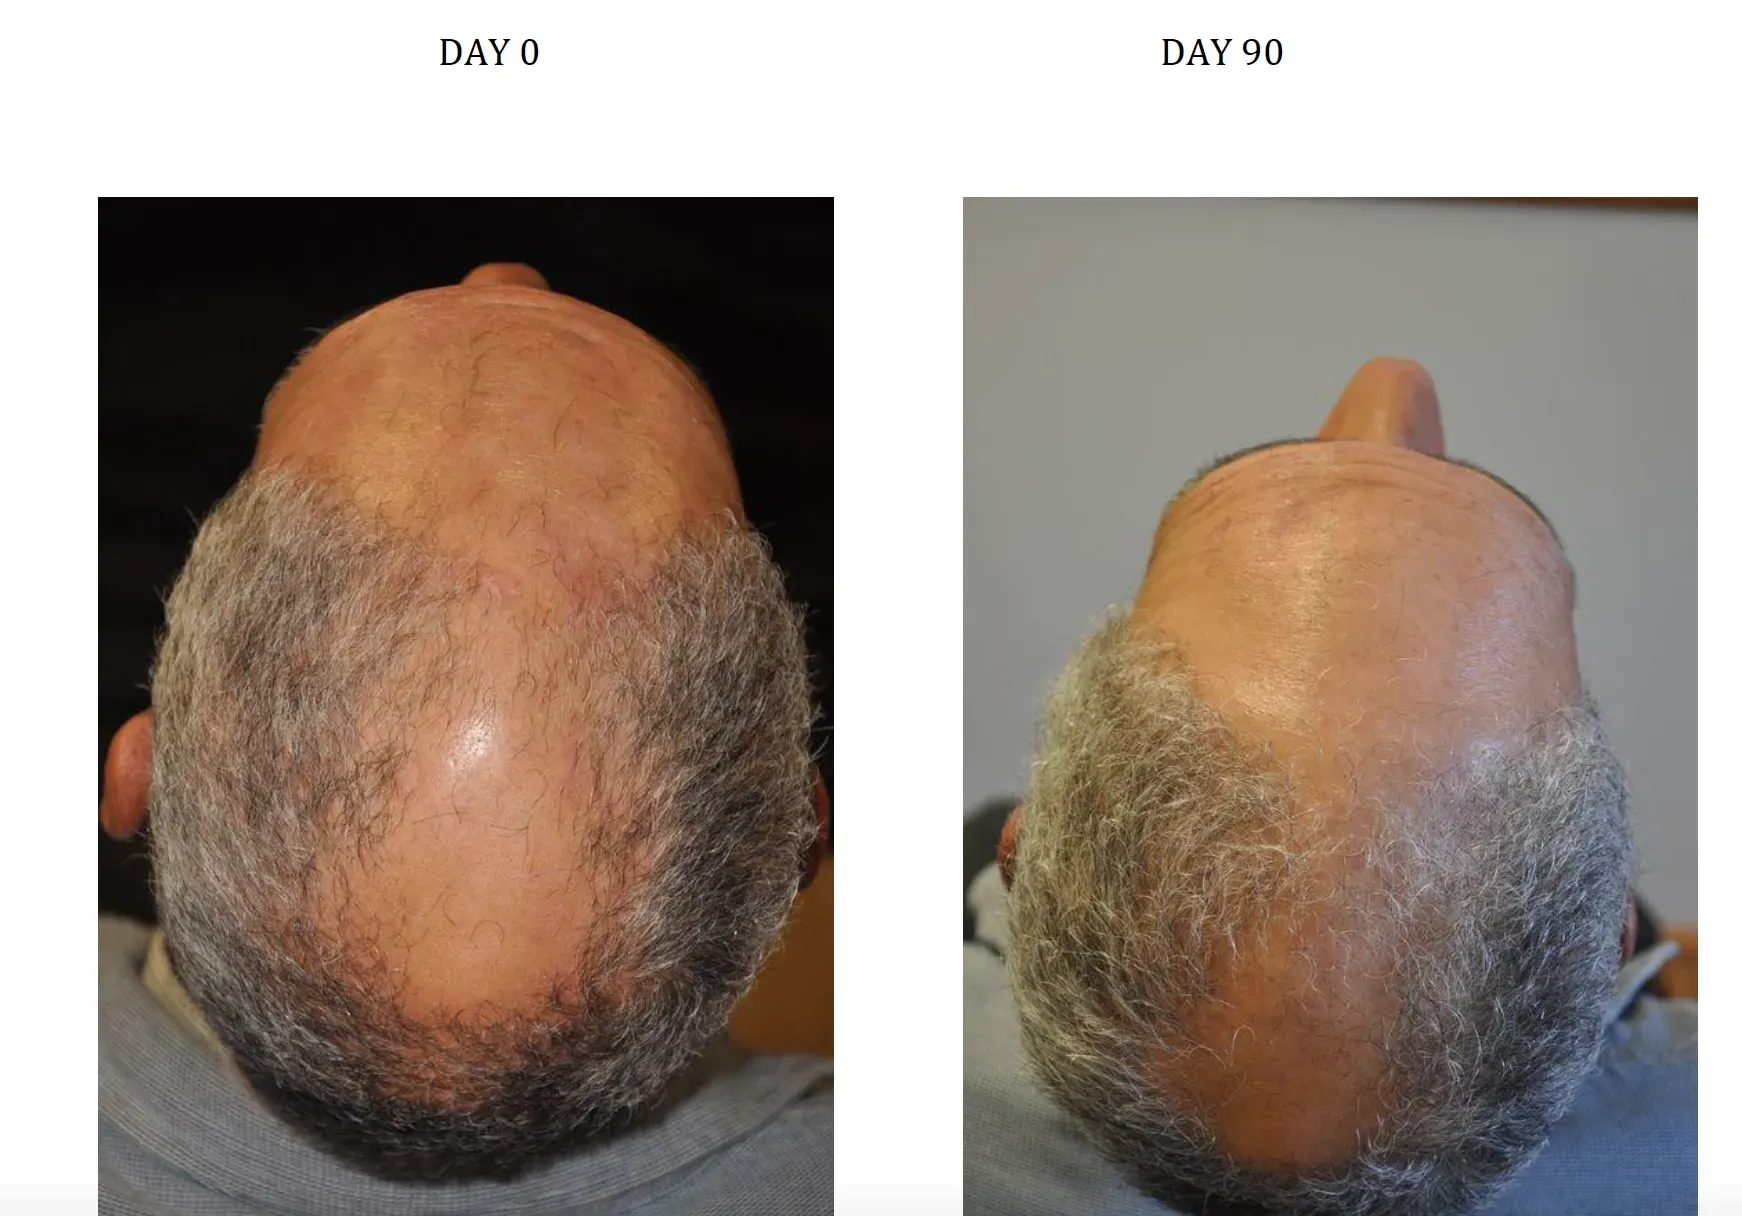 Before and after photos of taking Nanoxidil in a male patient